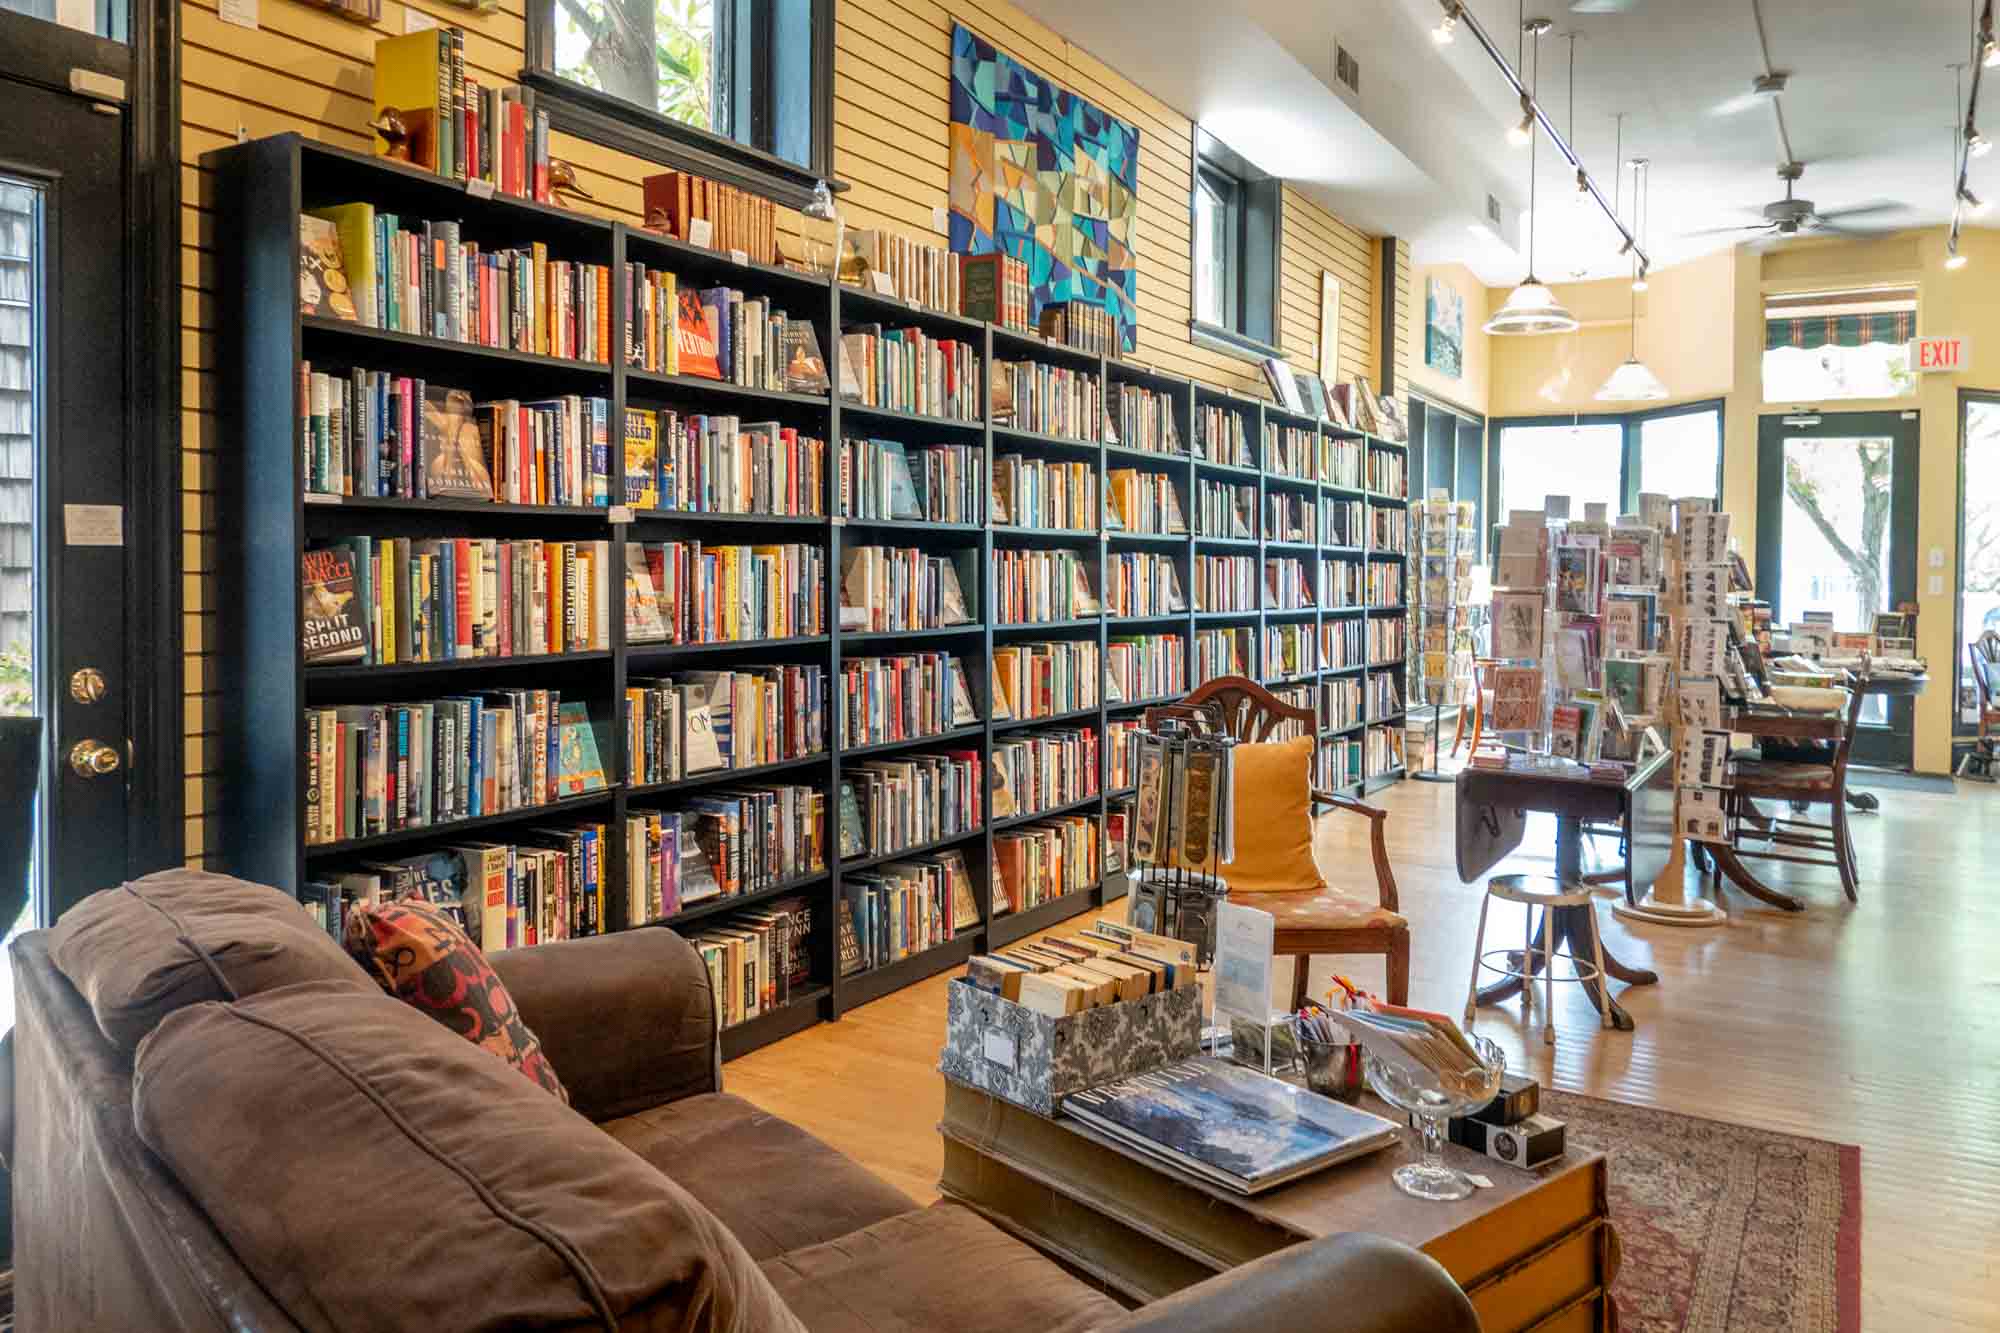 Bookstore filled with shelves of books, greeting cards displays, and a couch